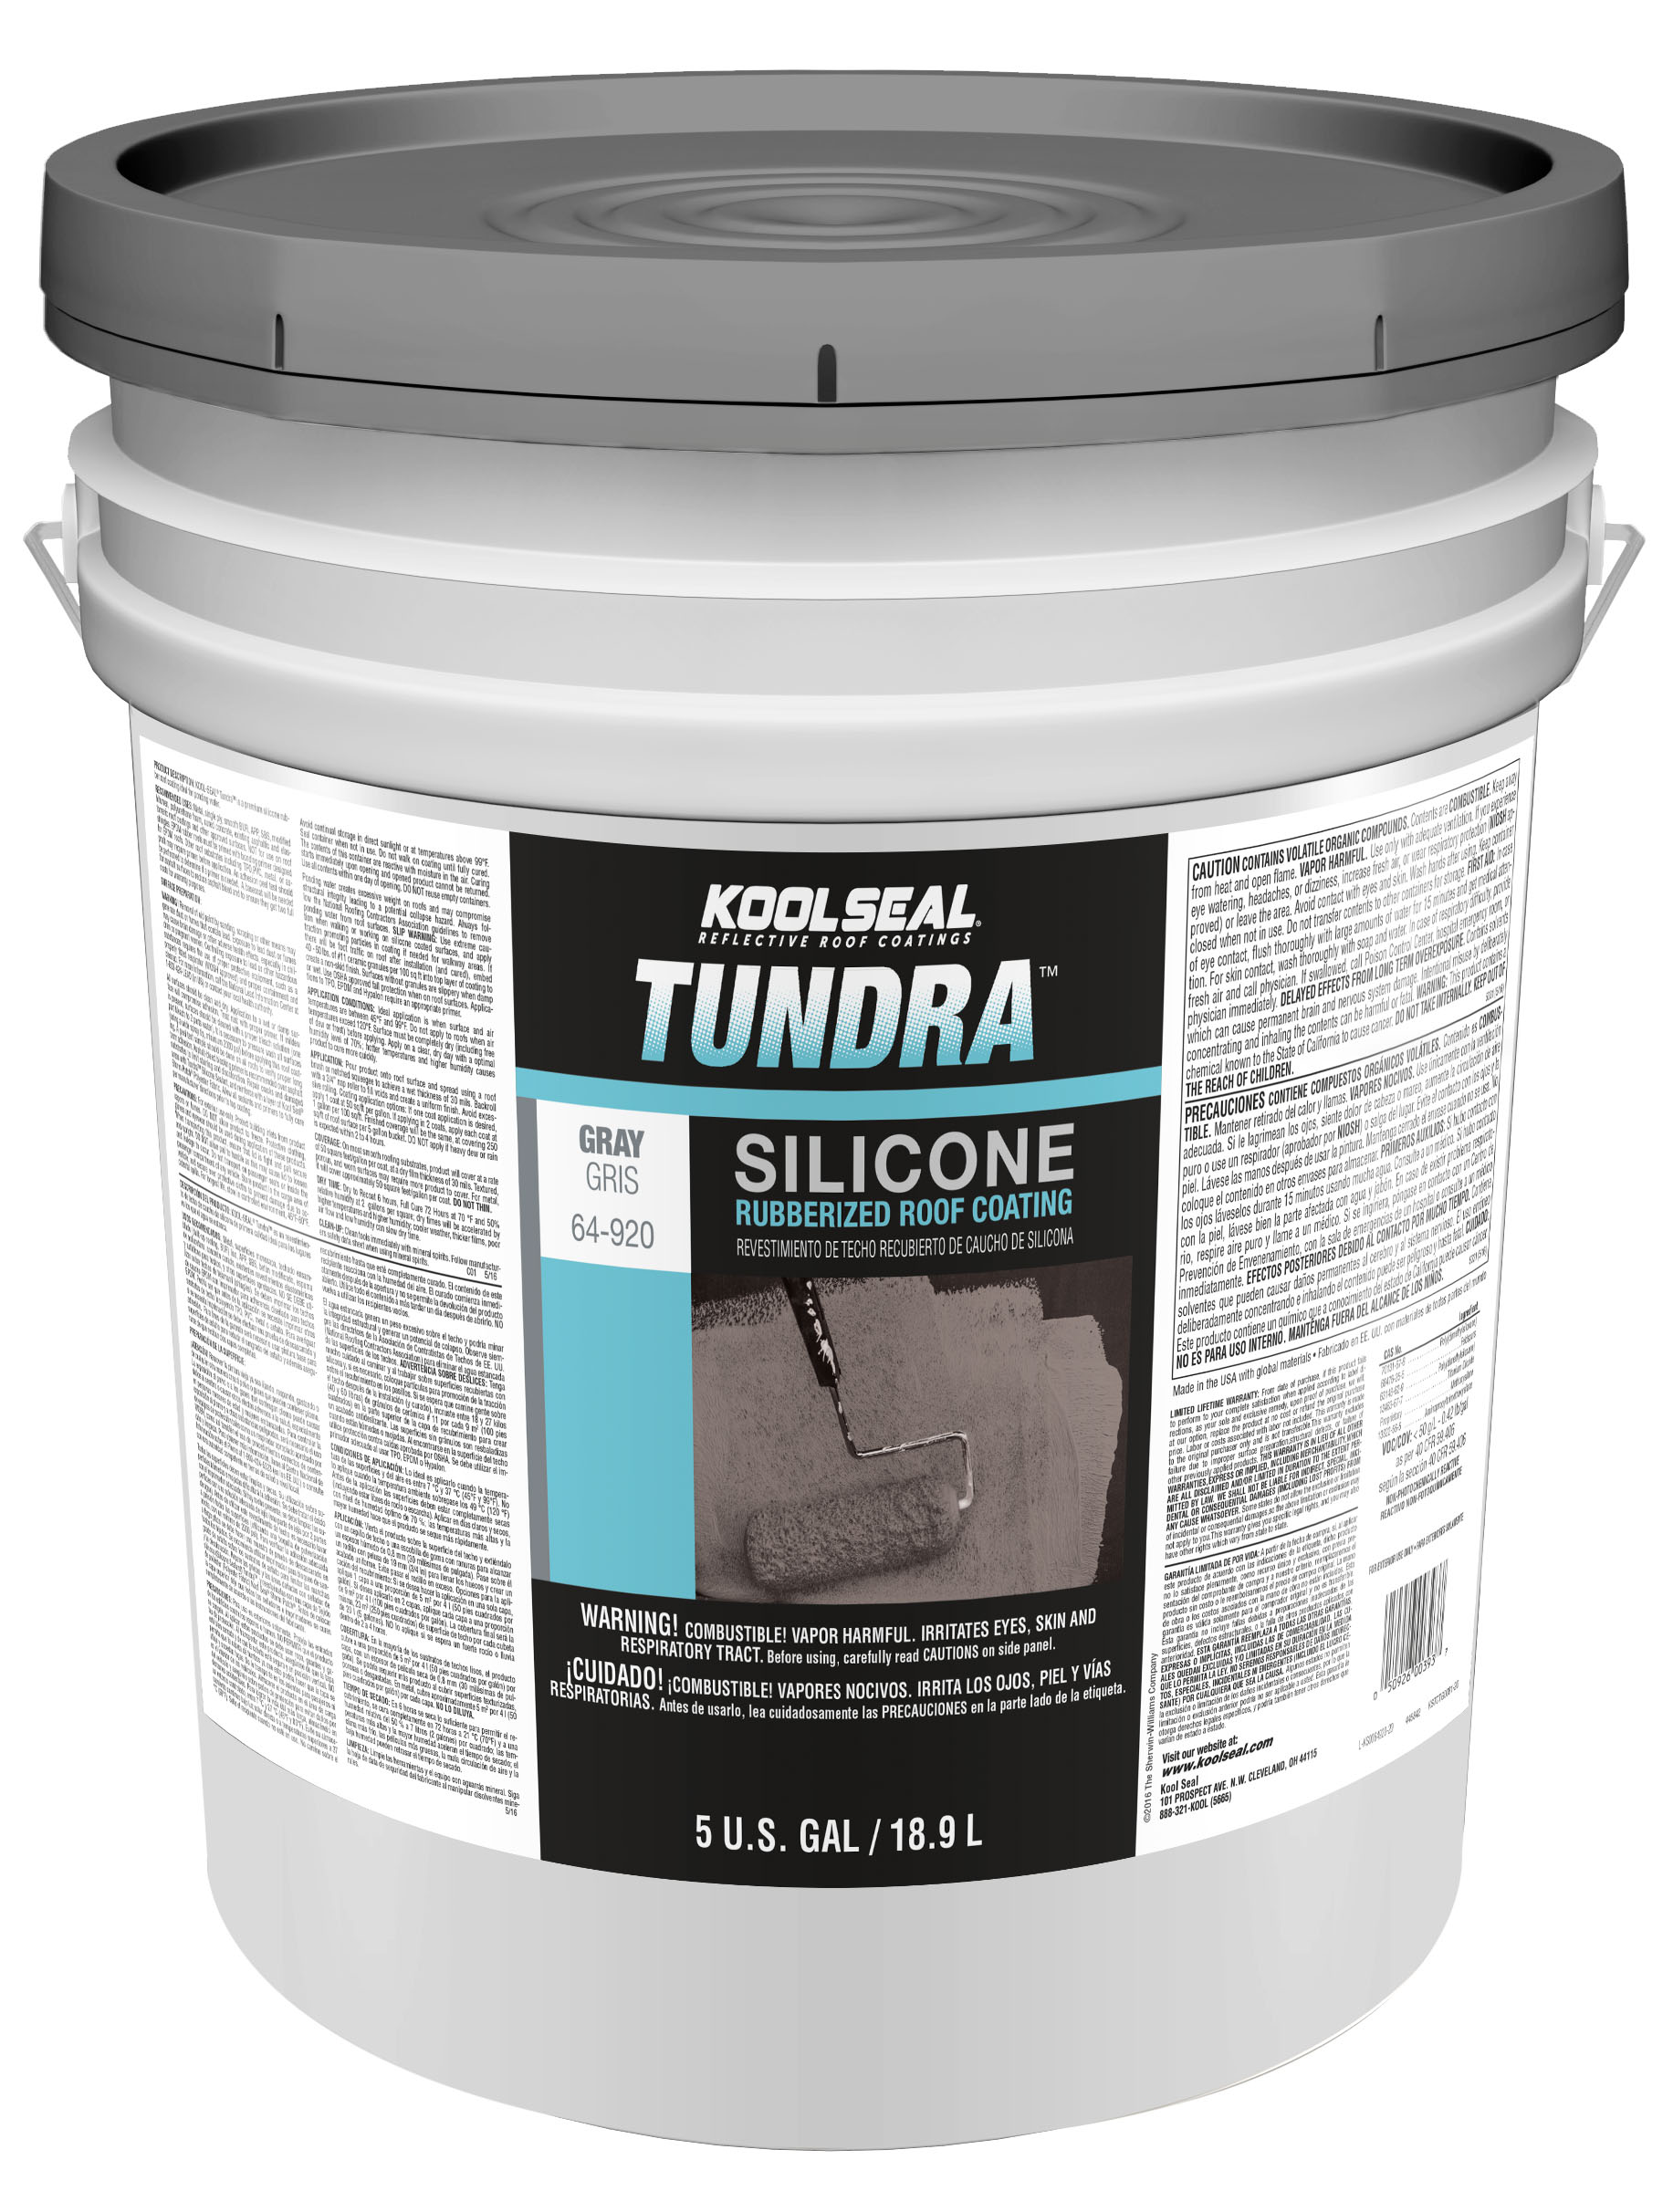 Tundra Silicone Rubberized Gray Roof Coating - Koolseal